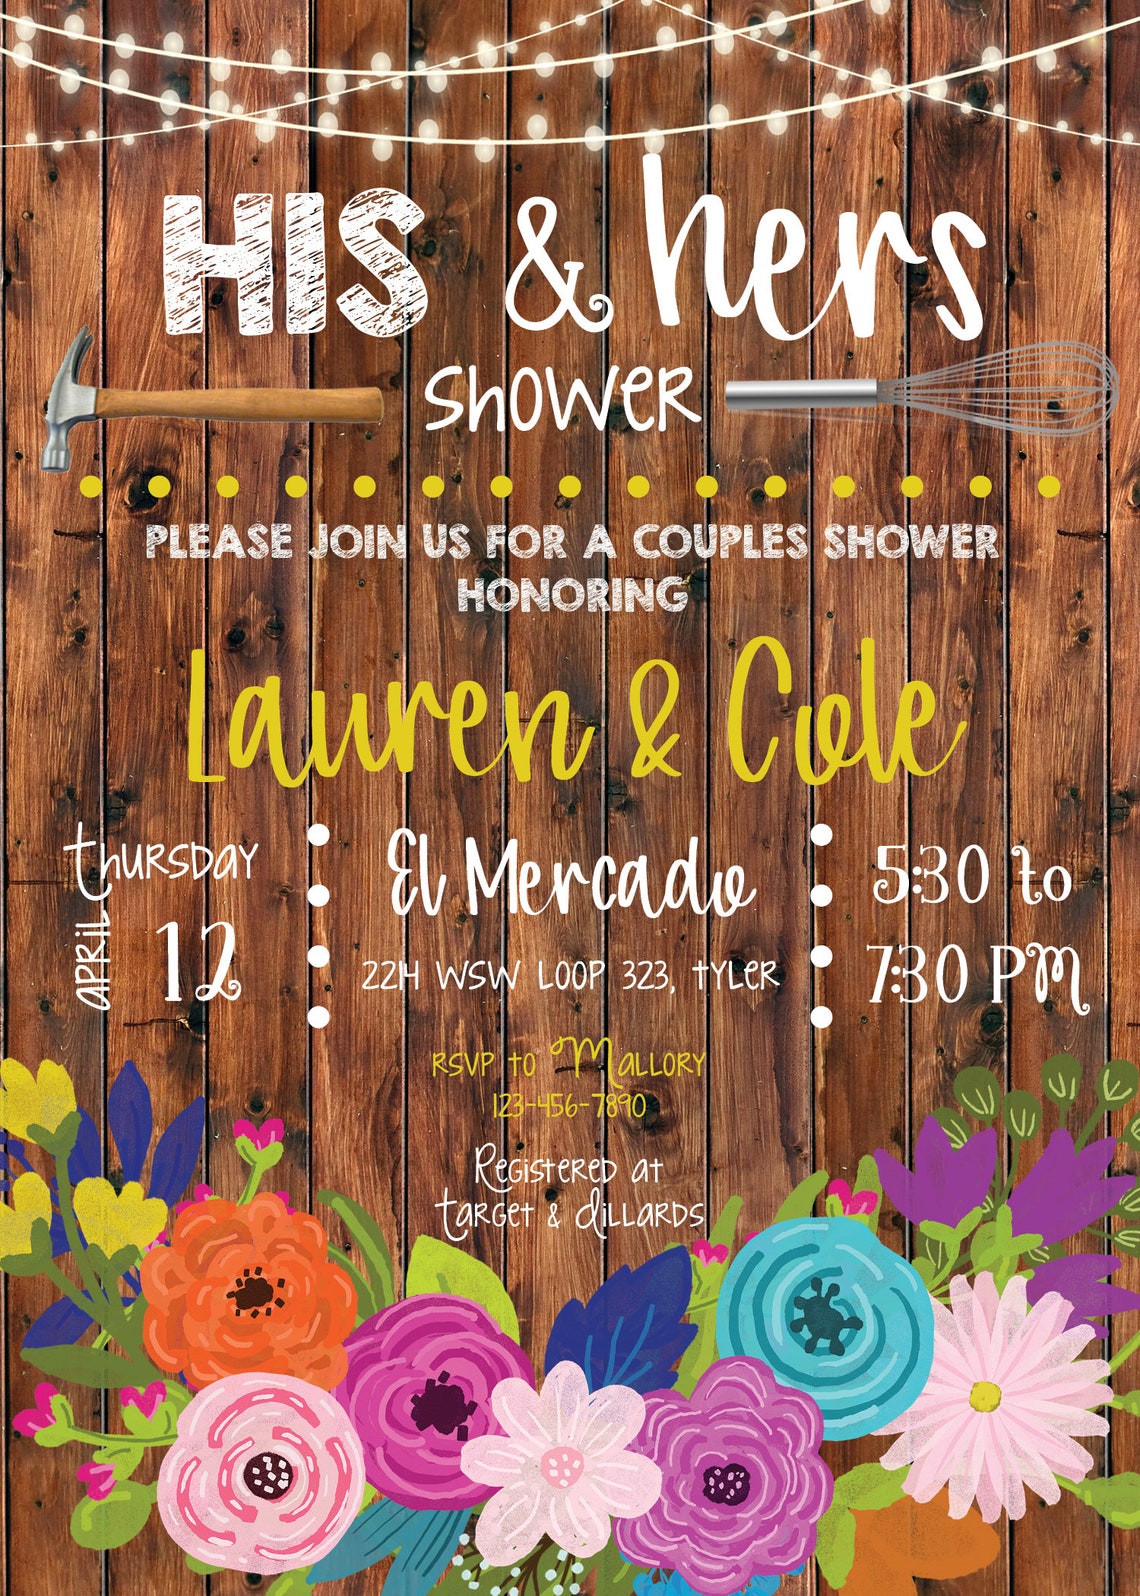 bridal-shower-invitation-couples-co-ed-shower-rustic-floral-etsy